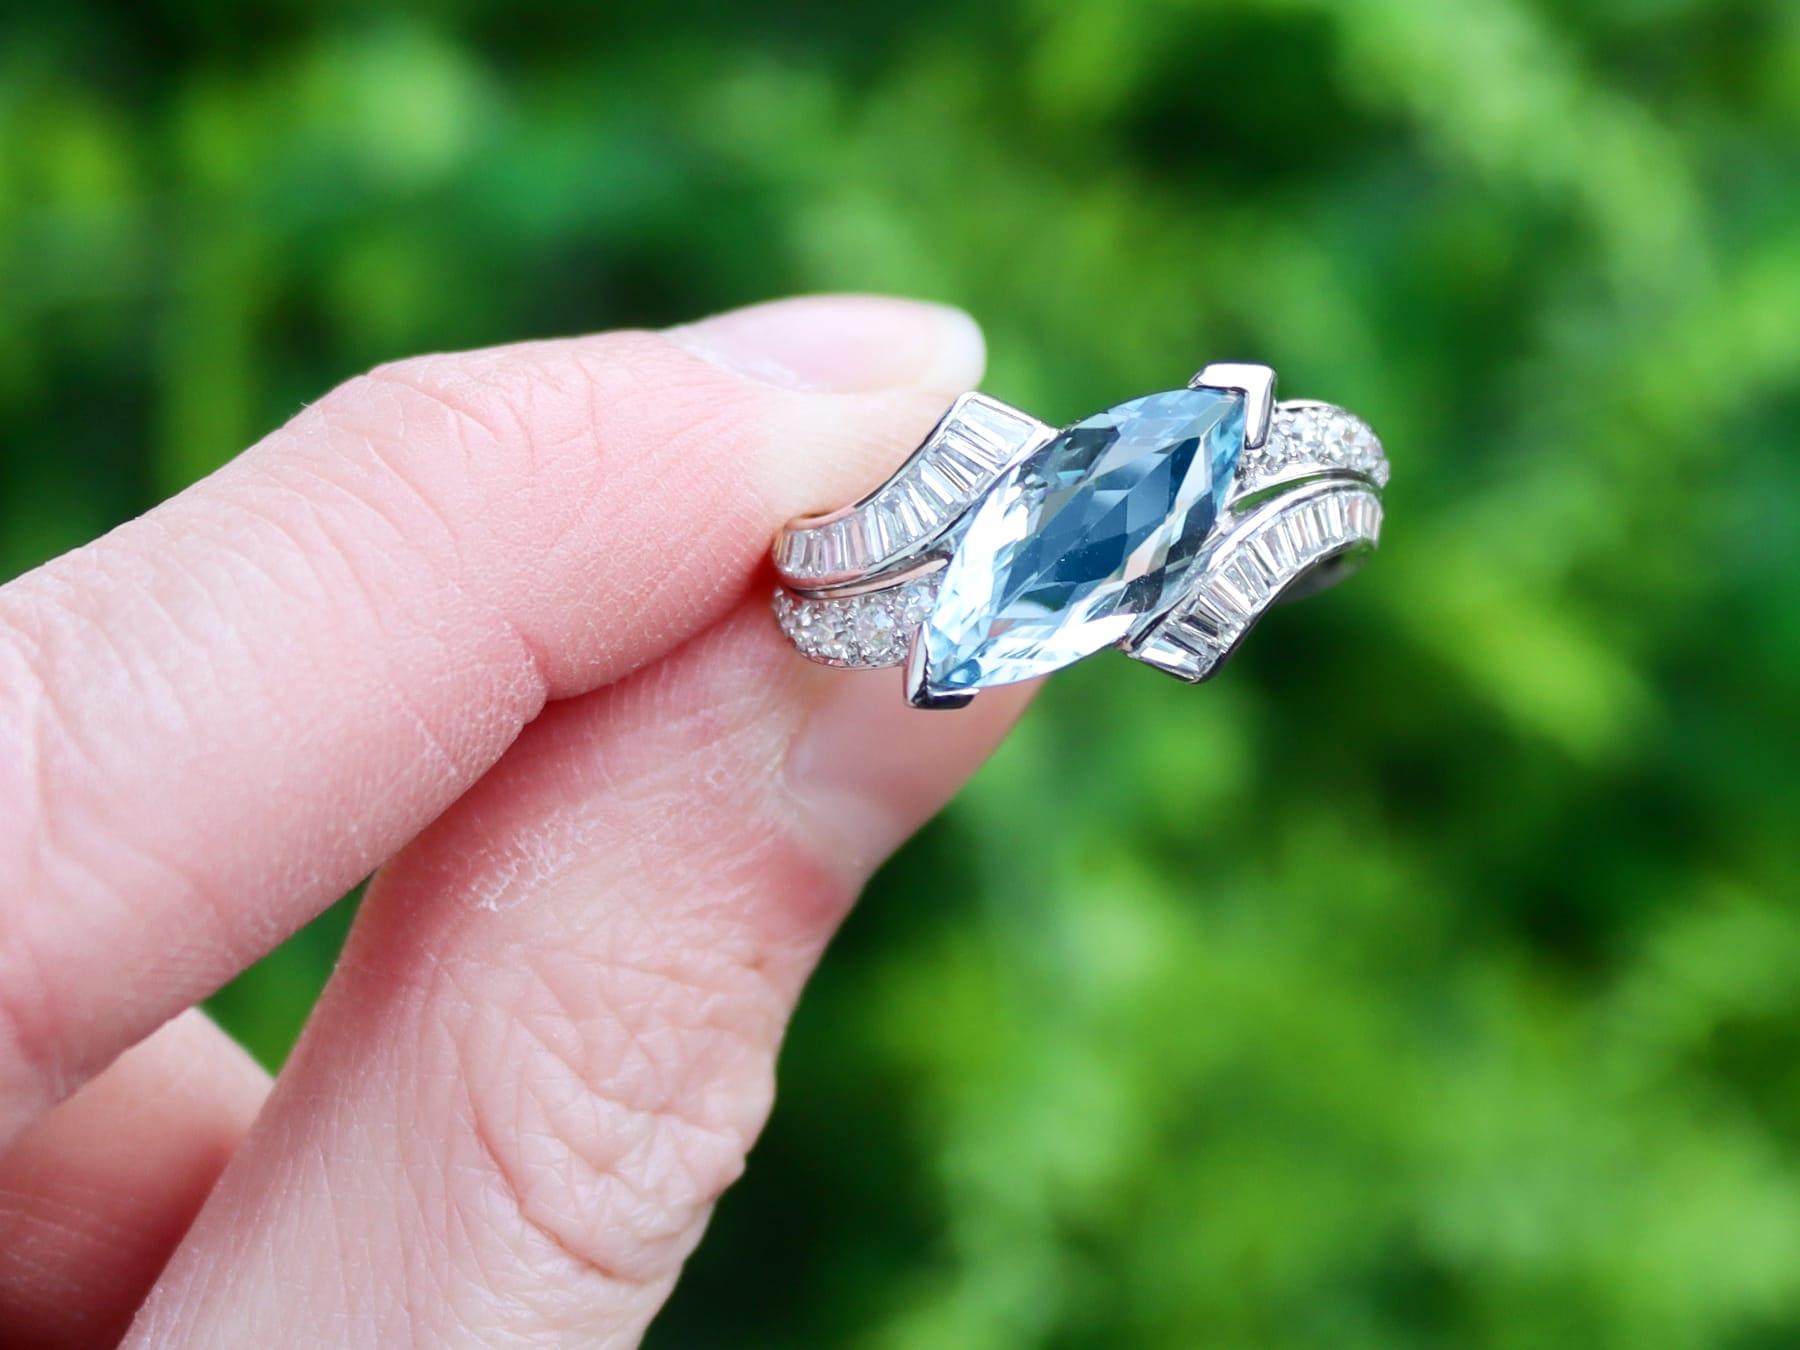 A stunning, fine and impressive vintage 2.92 carat aquamarine and 1.00 carat diamond, platinum dress ring; part of our diverse vintage jewellery and estate jewelry collections.

This stunning, fine and impressive vintage dress ring has been crafted